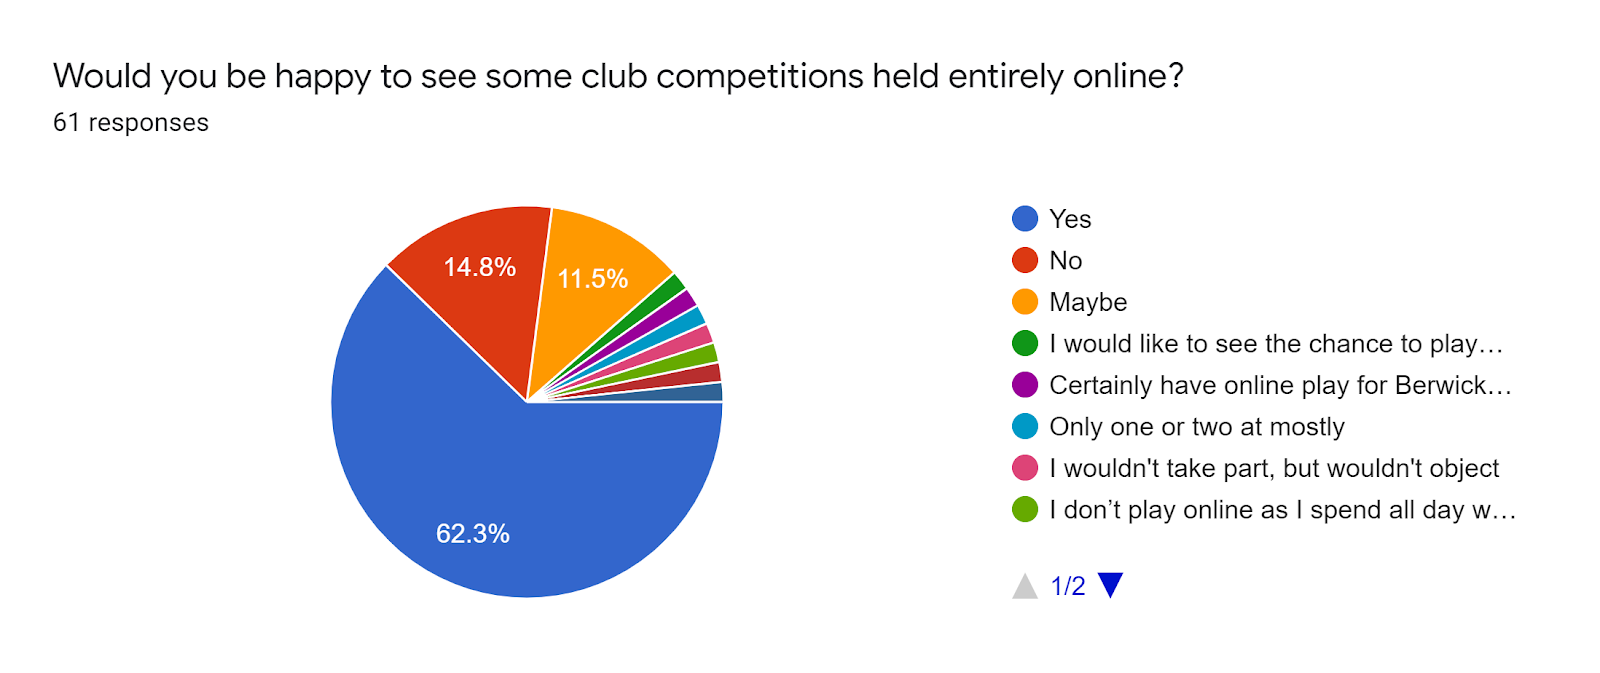 Forms response chart. Question title: Would you be happy to see some club competitions held entirely online?. Number of responses: 61 responses.